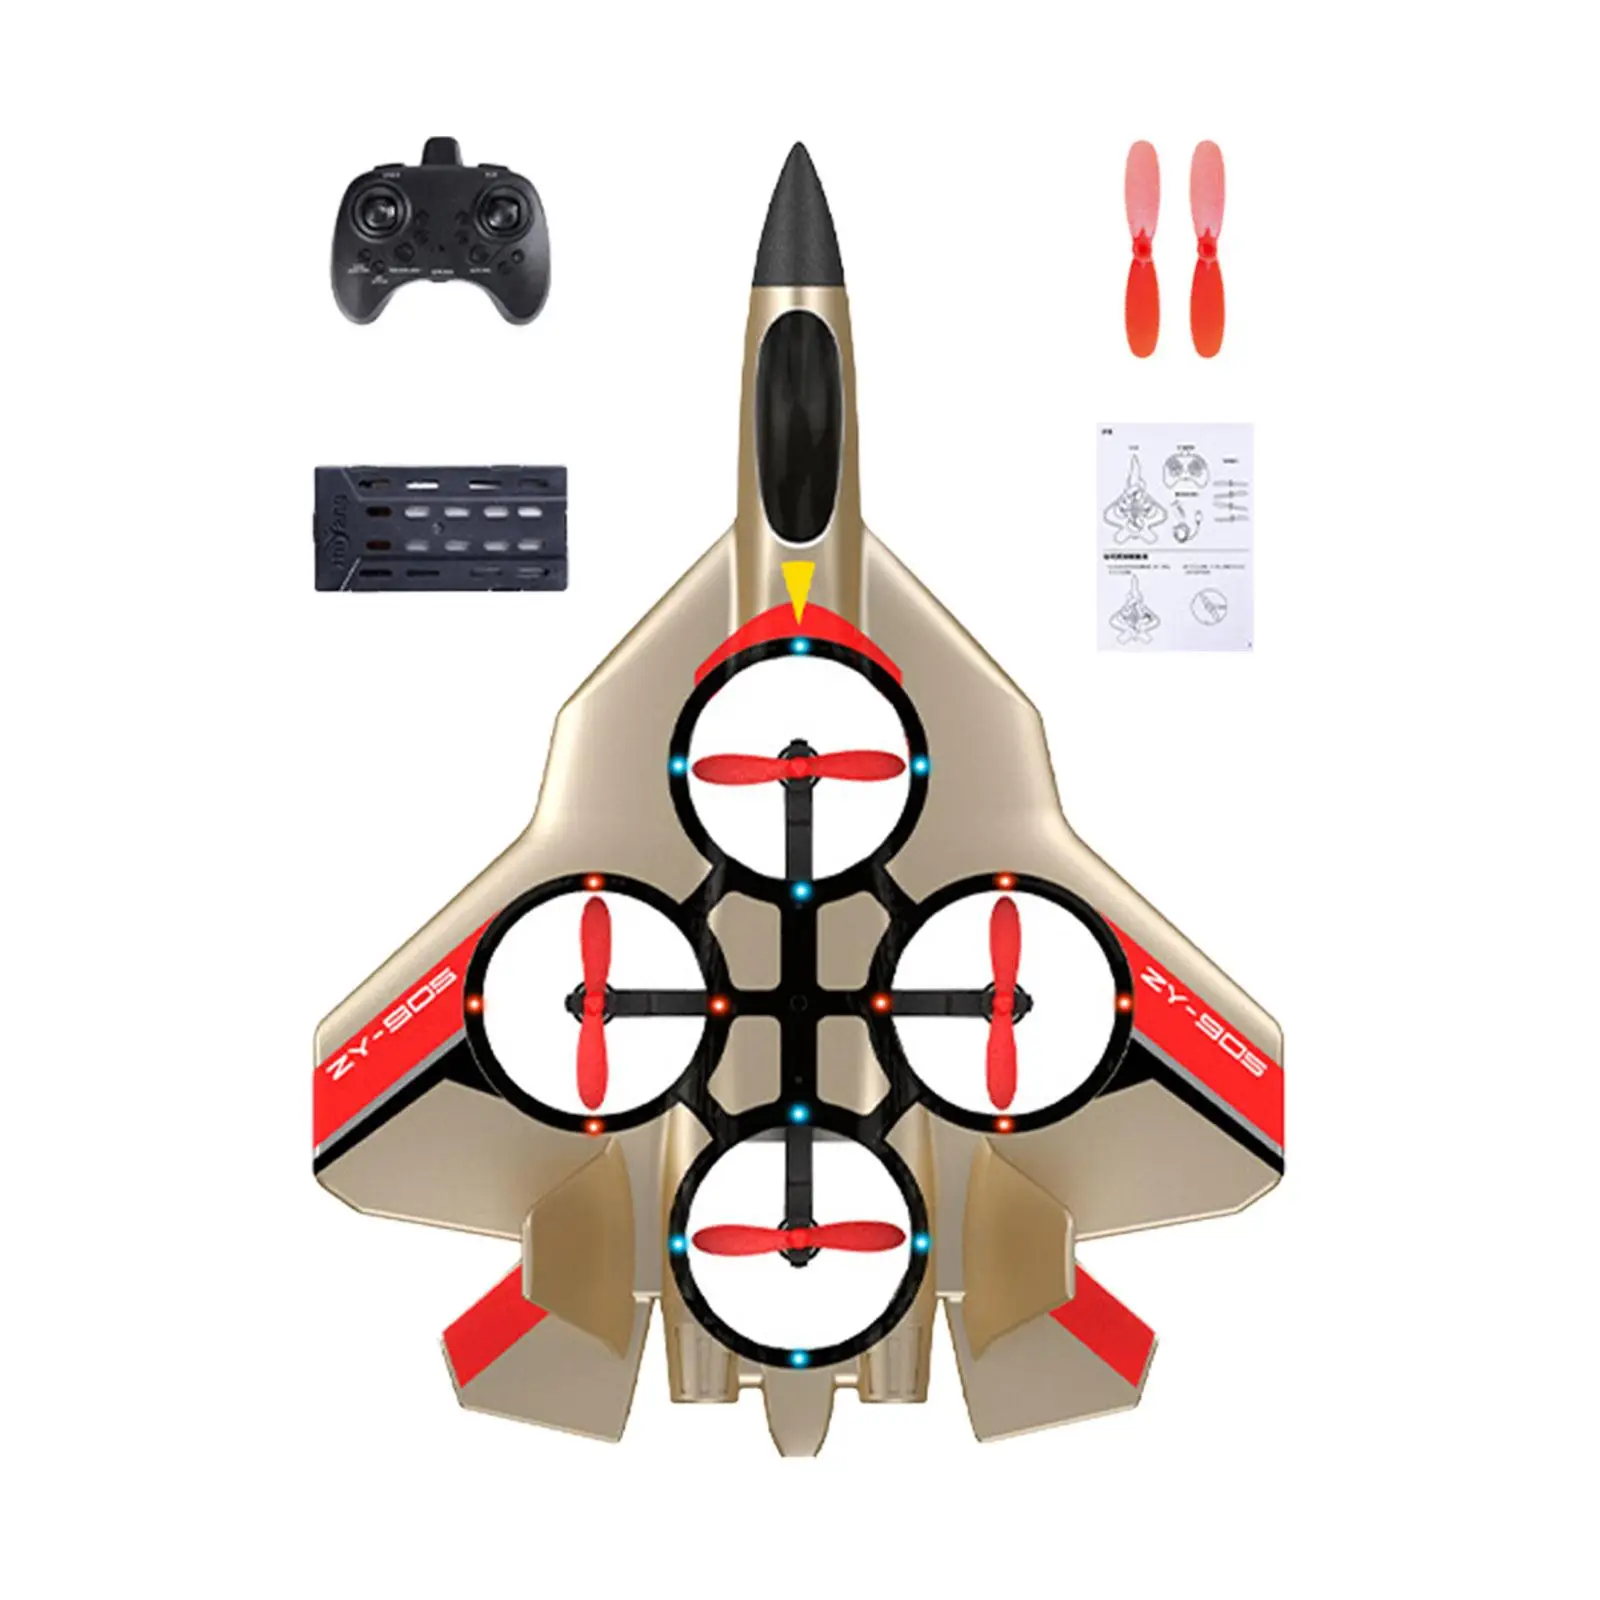 Foam RC Airplane Easy to Fly 4 CH Plane RC Glider Remote Control Airplane for Beginner Kids Boys Girls Adults Birthday Gifts